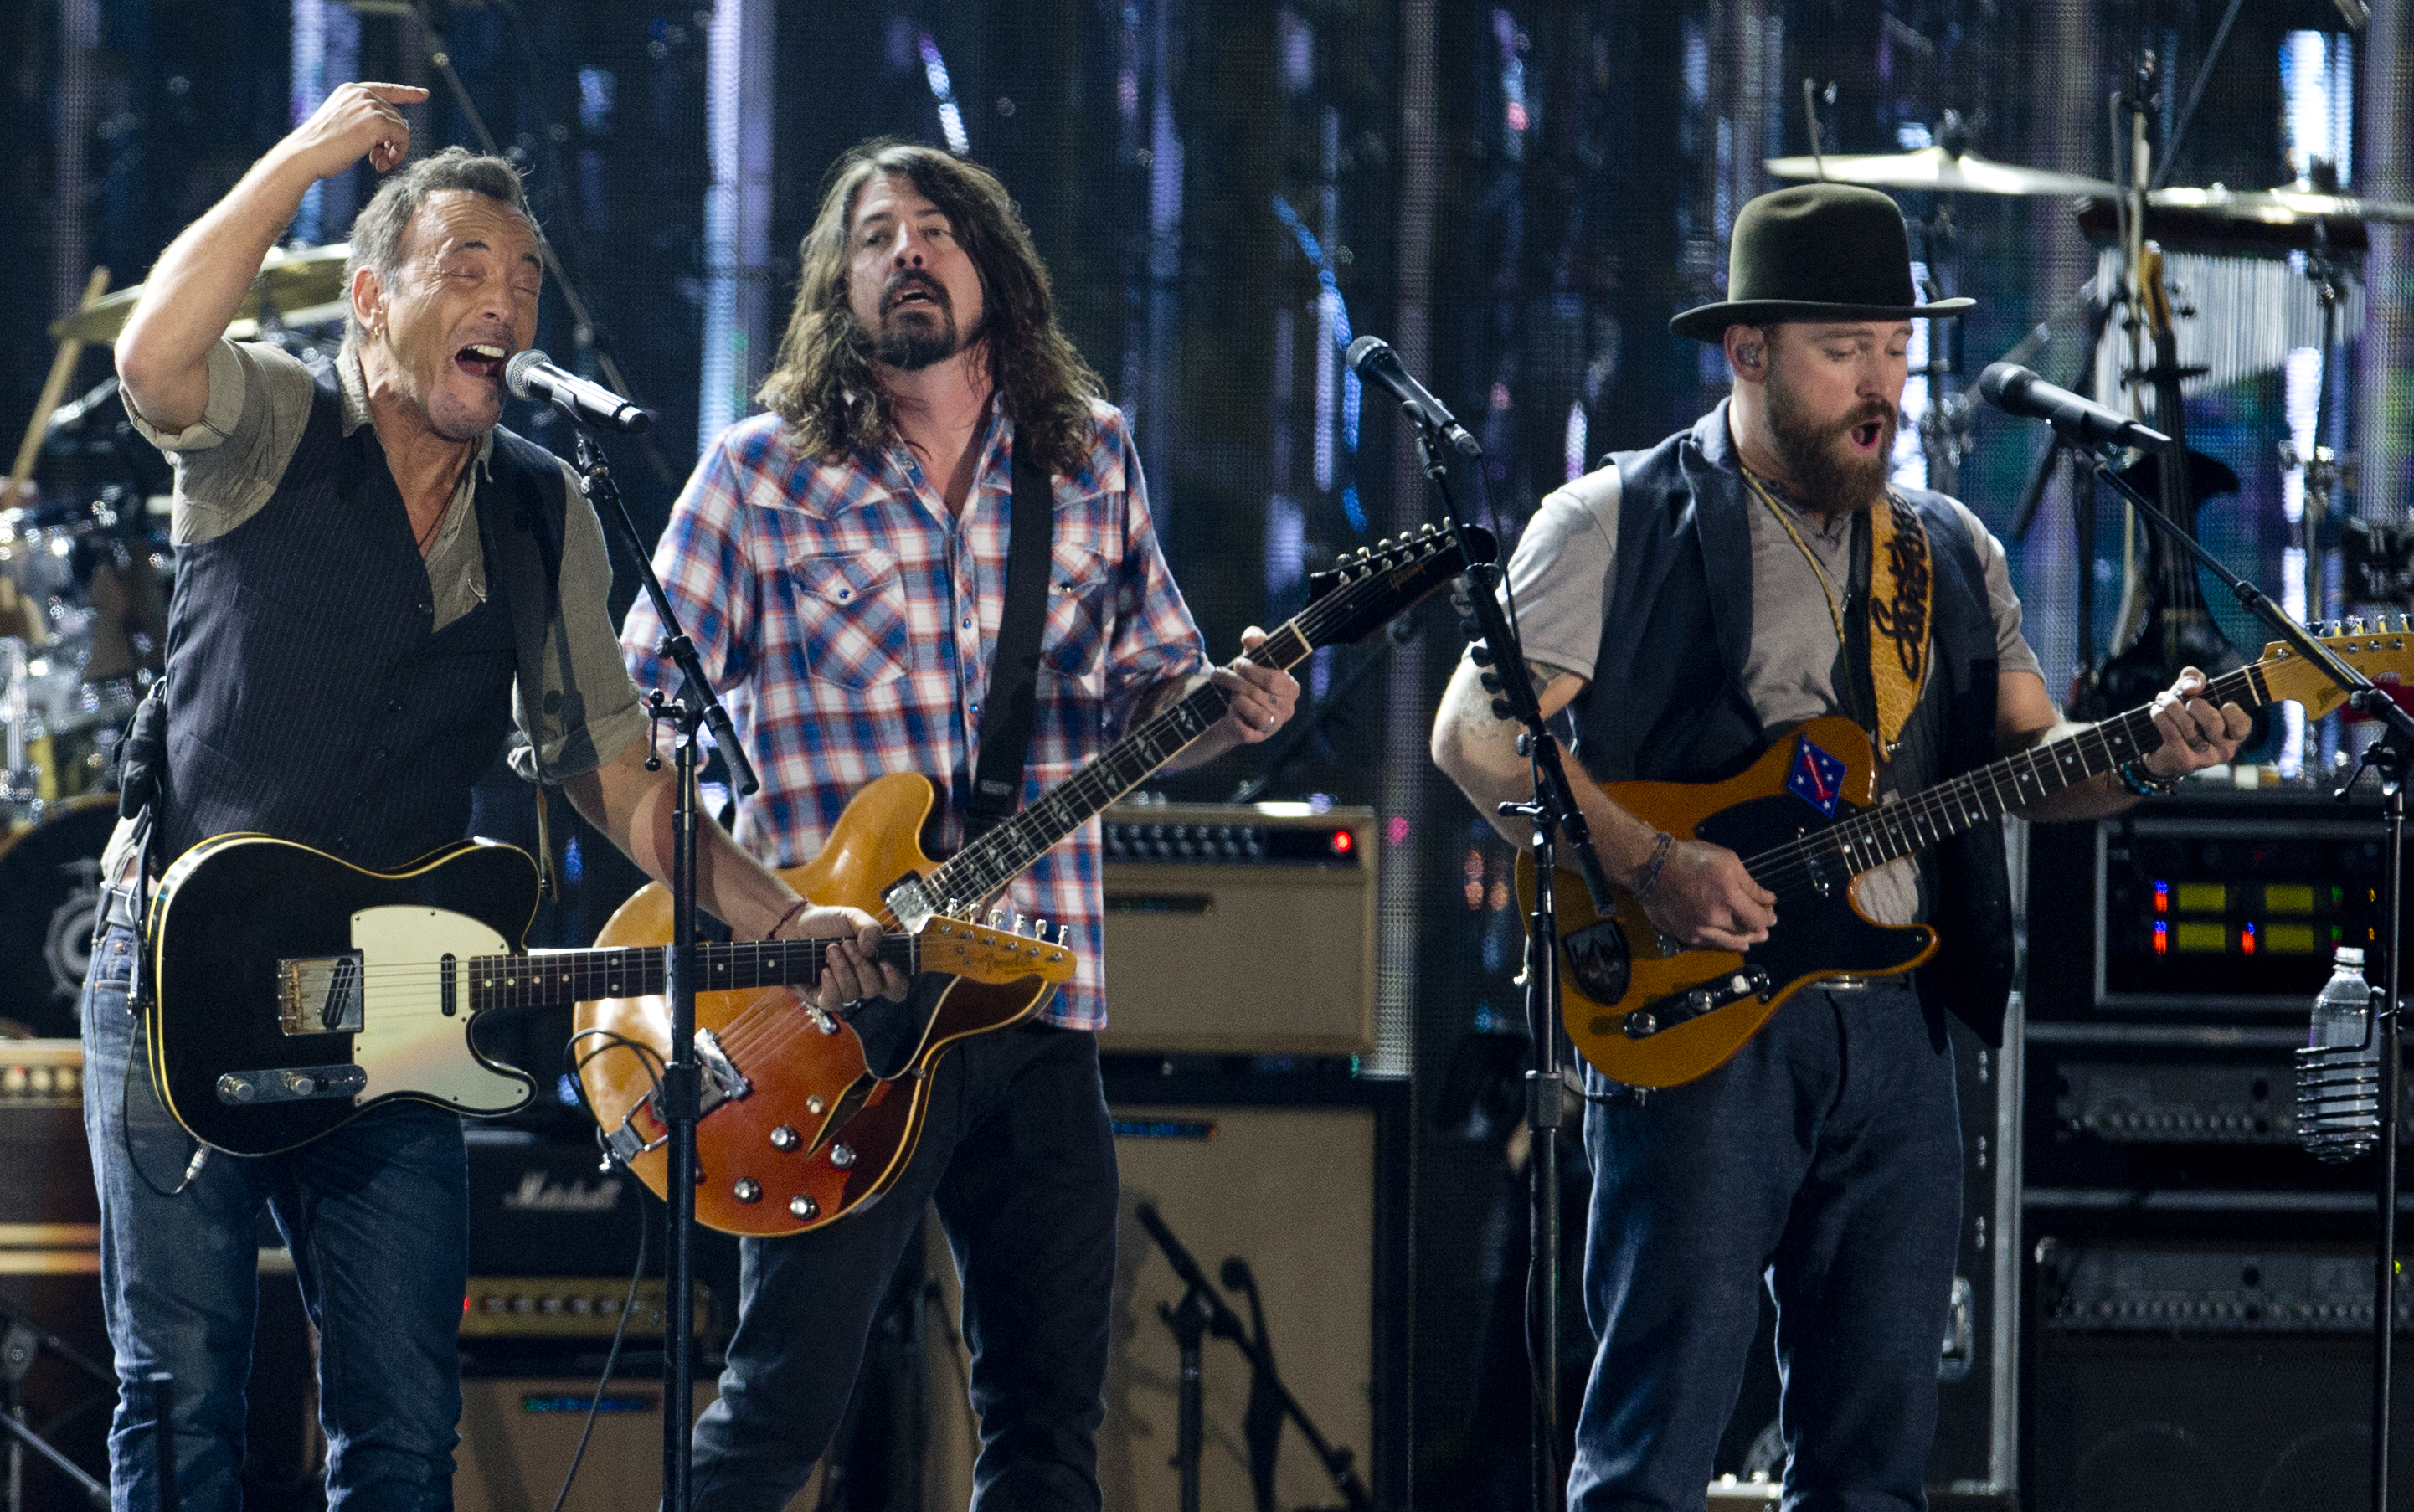 From left, Bruce Springsteen, Dave Grohl, and Zac Brown, sing on the National Mall in Washington, Tuesday, Nov. 11, 2014, during the Concert for Valor. The Veterans Day event is hosted by HBO, Starbucks and Chase and is free and open to the public. (AP Photo/Carolyn Kaster)